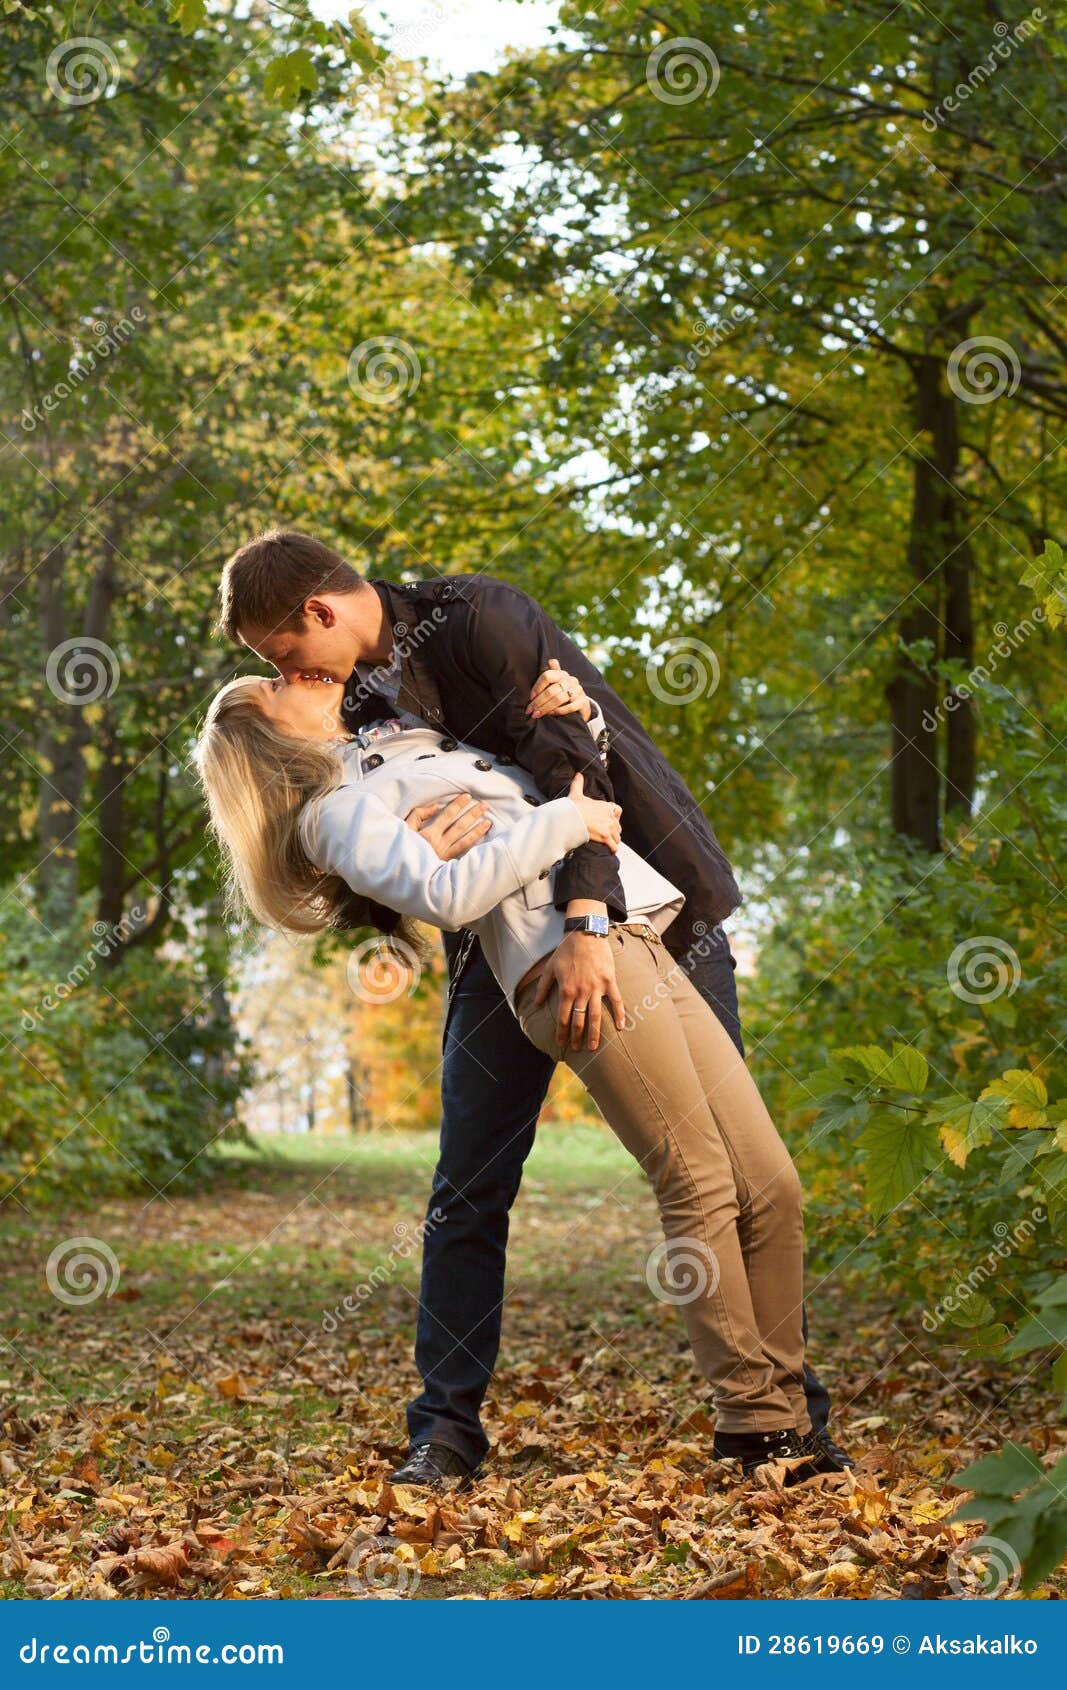 Romantic Couple Kissing Stock Image Image Of Adult People 28619669 